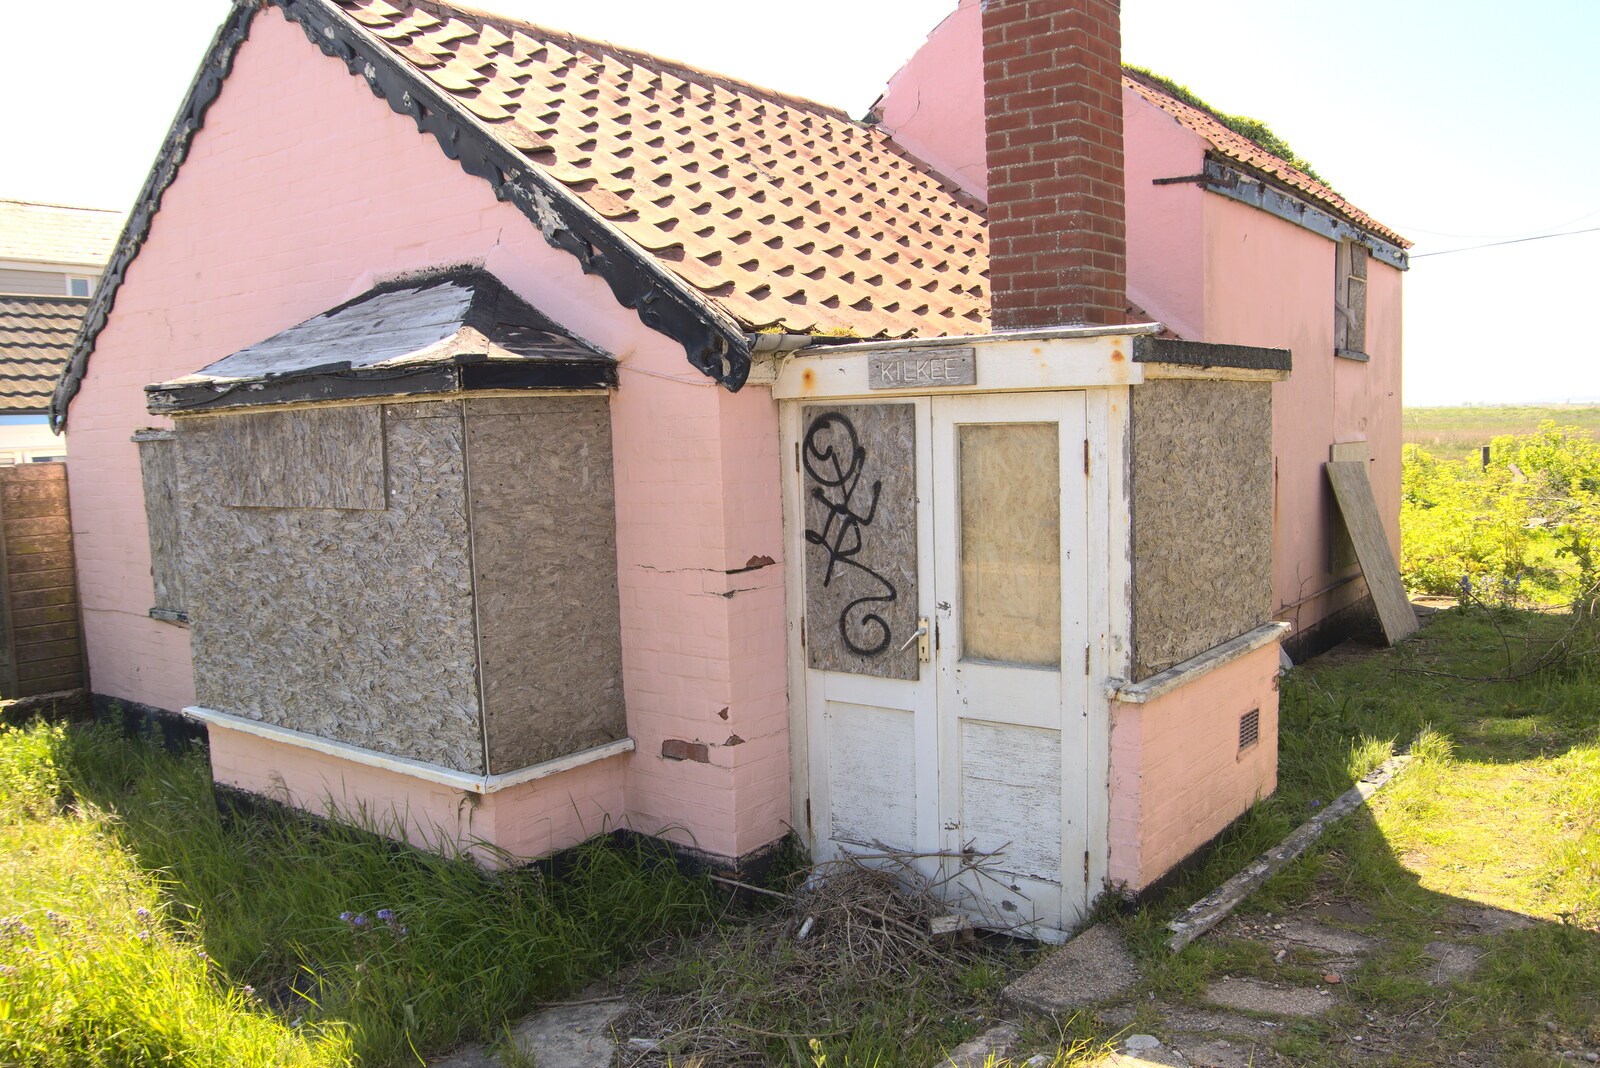 An implausibly-derelict house on Ferry Road from A Day at the Beach with Sis, Southwold, Suffolk - 31st May 2021